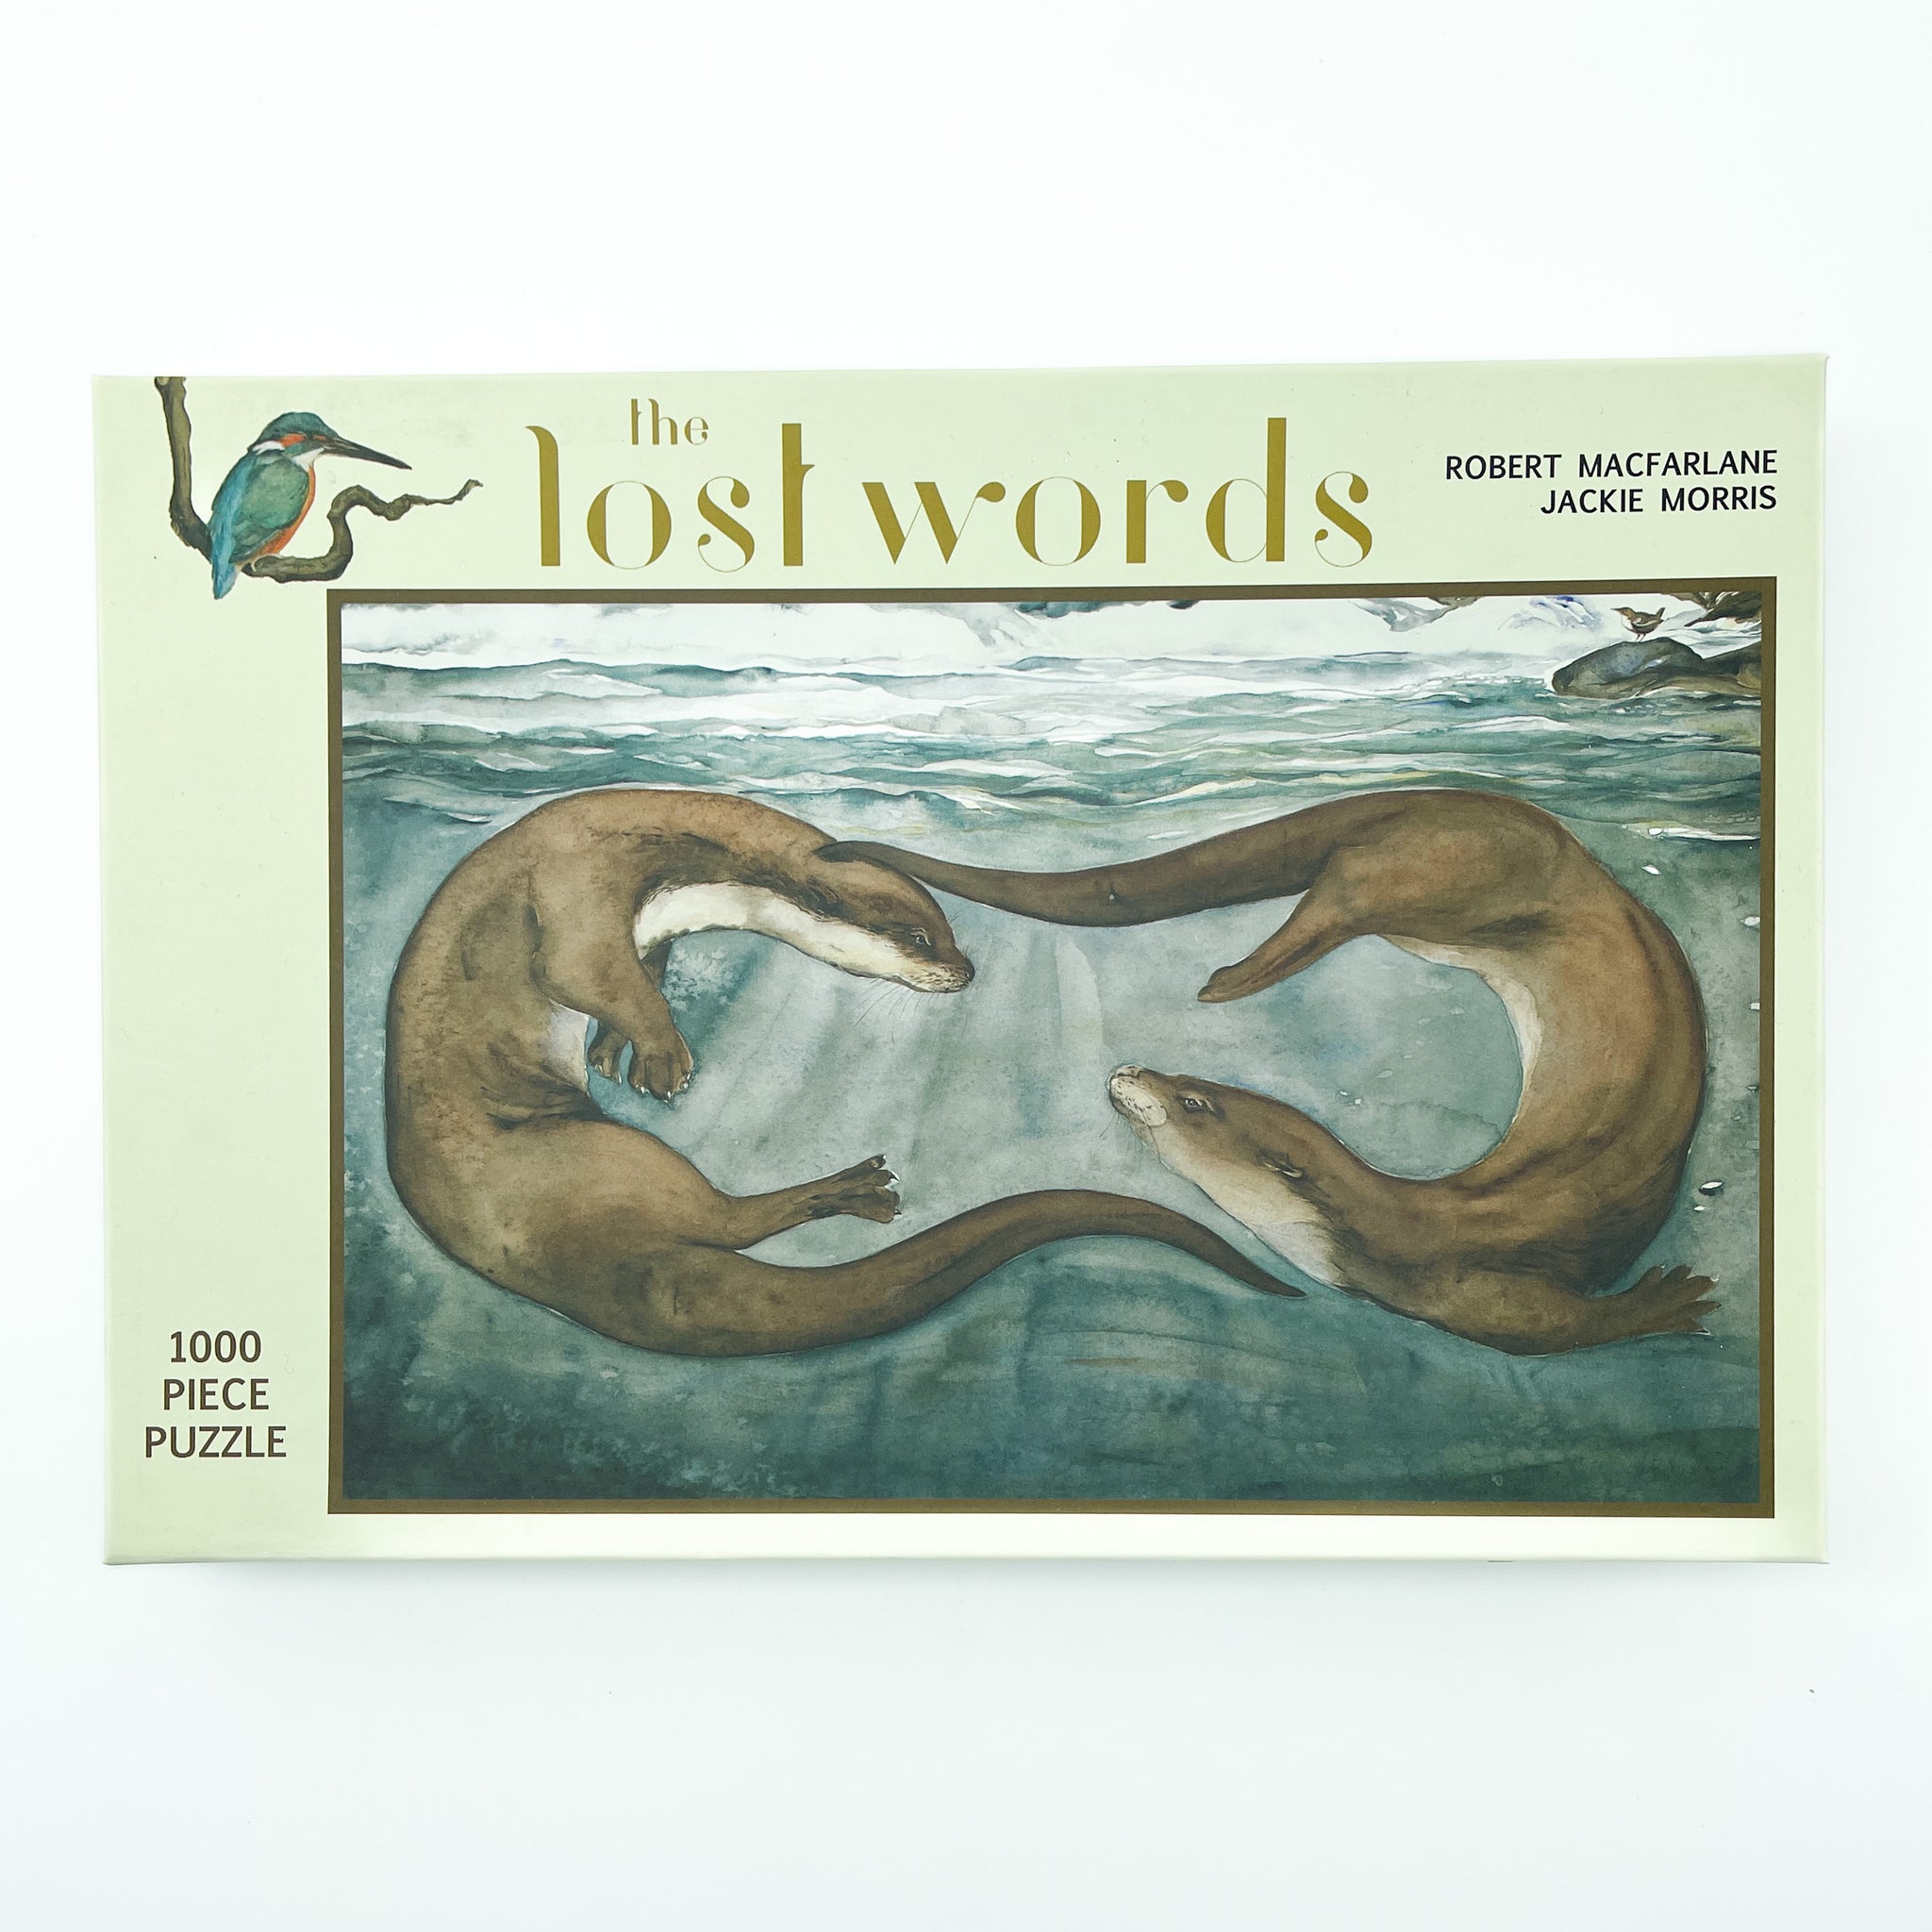 The Lost Words 1000 Piece Jigsaw Puzzle